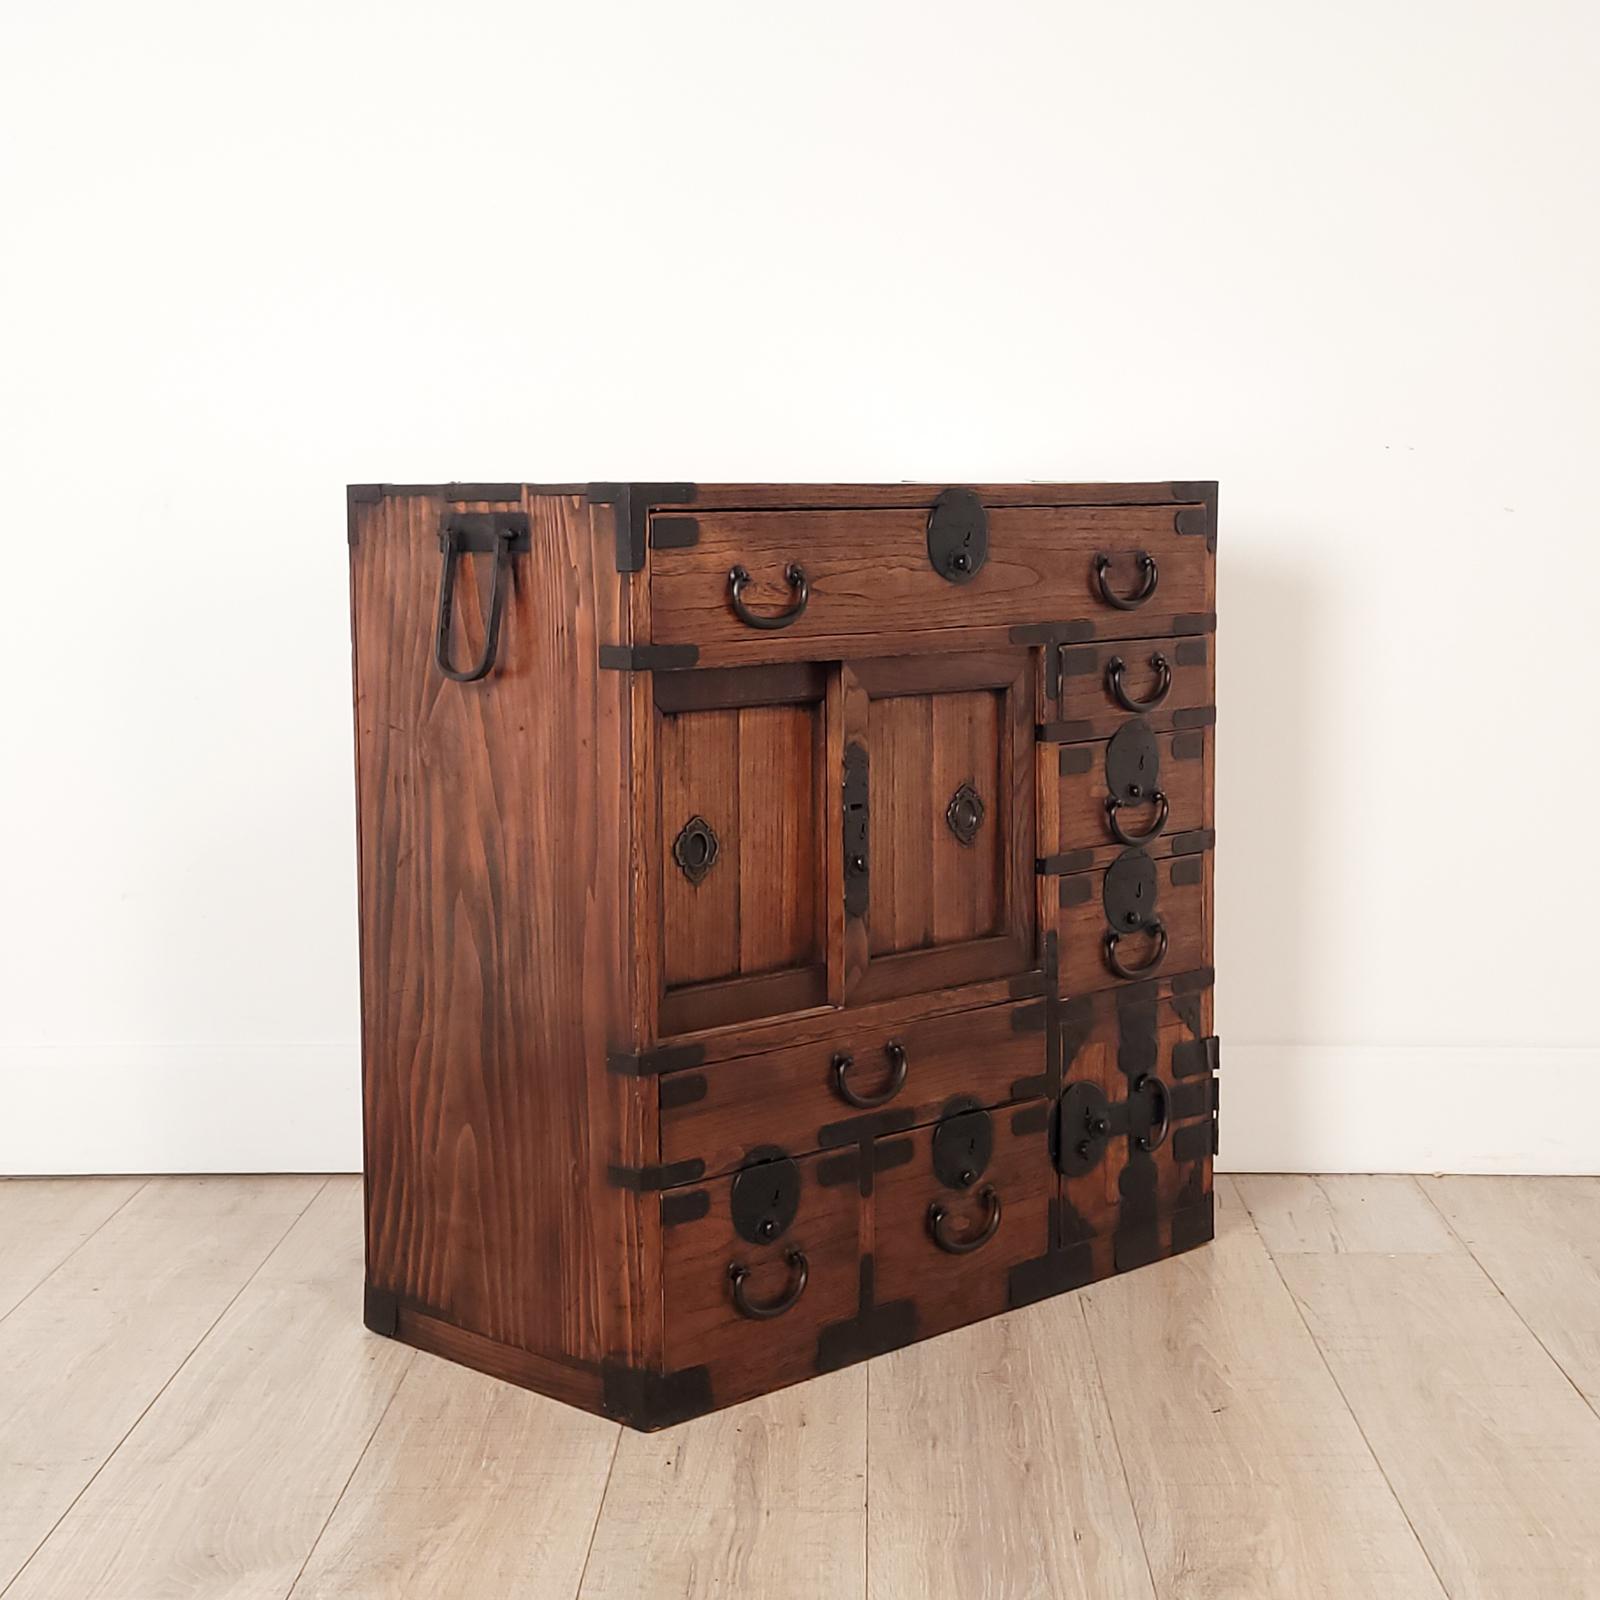 One section Choba (Merchant) Tansu, Kiri/Sugi wood, Meiji period

Configuration of drawers and sliding doors.  One large drawer at the top, sliding door and rows of three drawers, then a medium size drawer and bottom part has two small drawers and a